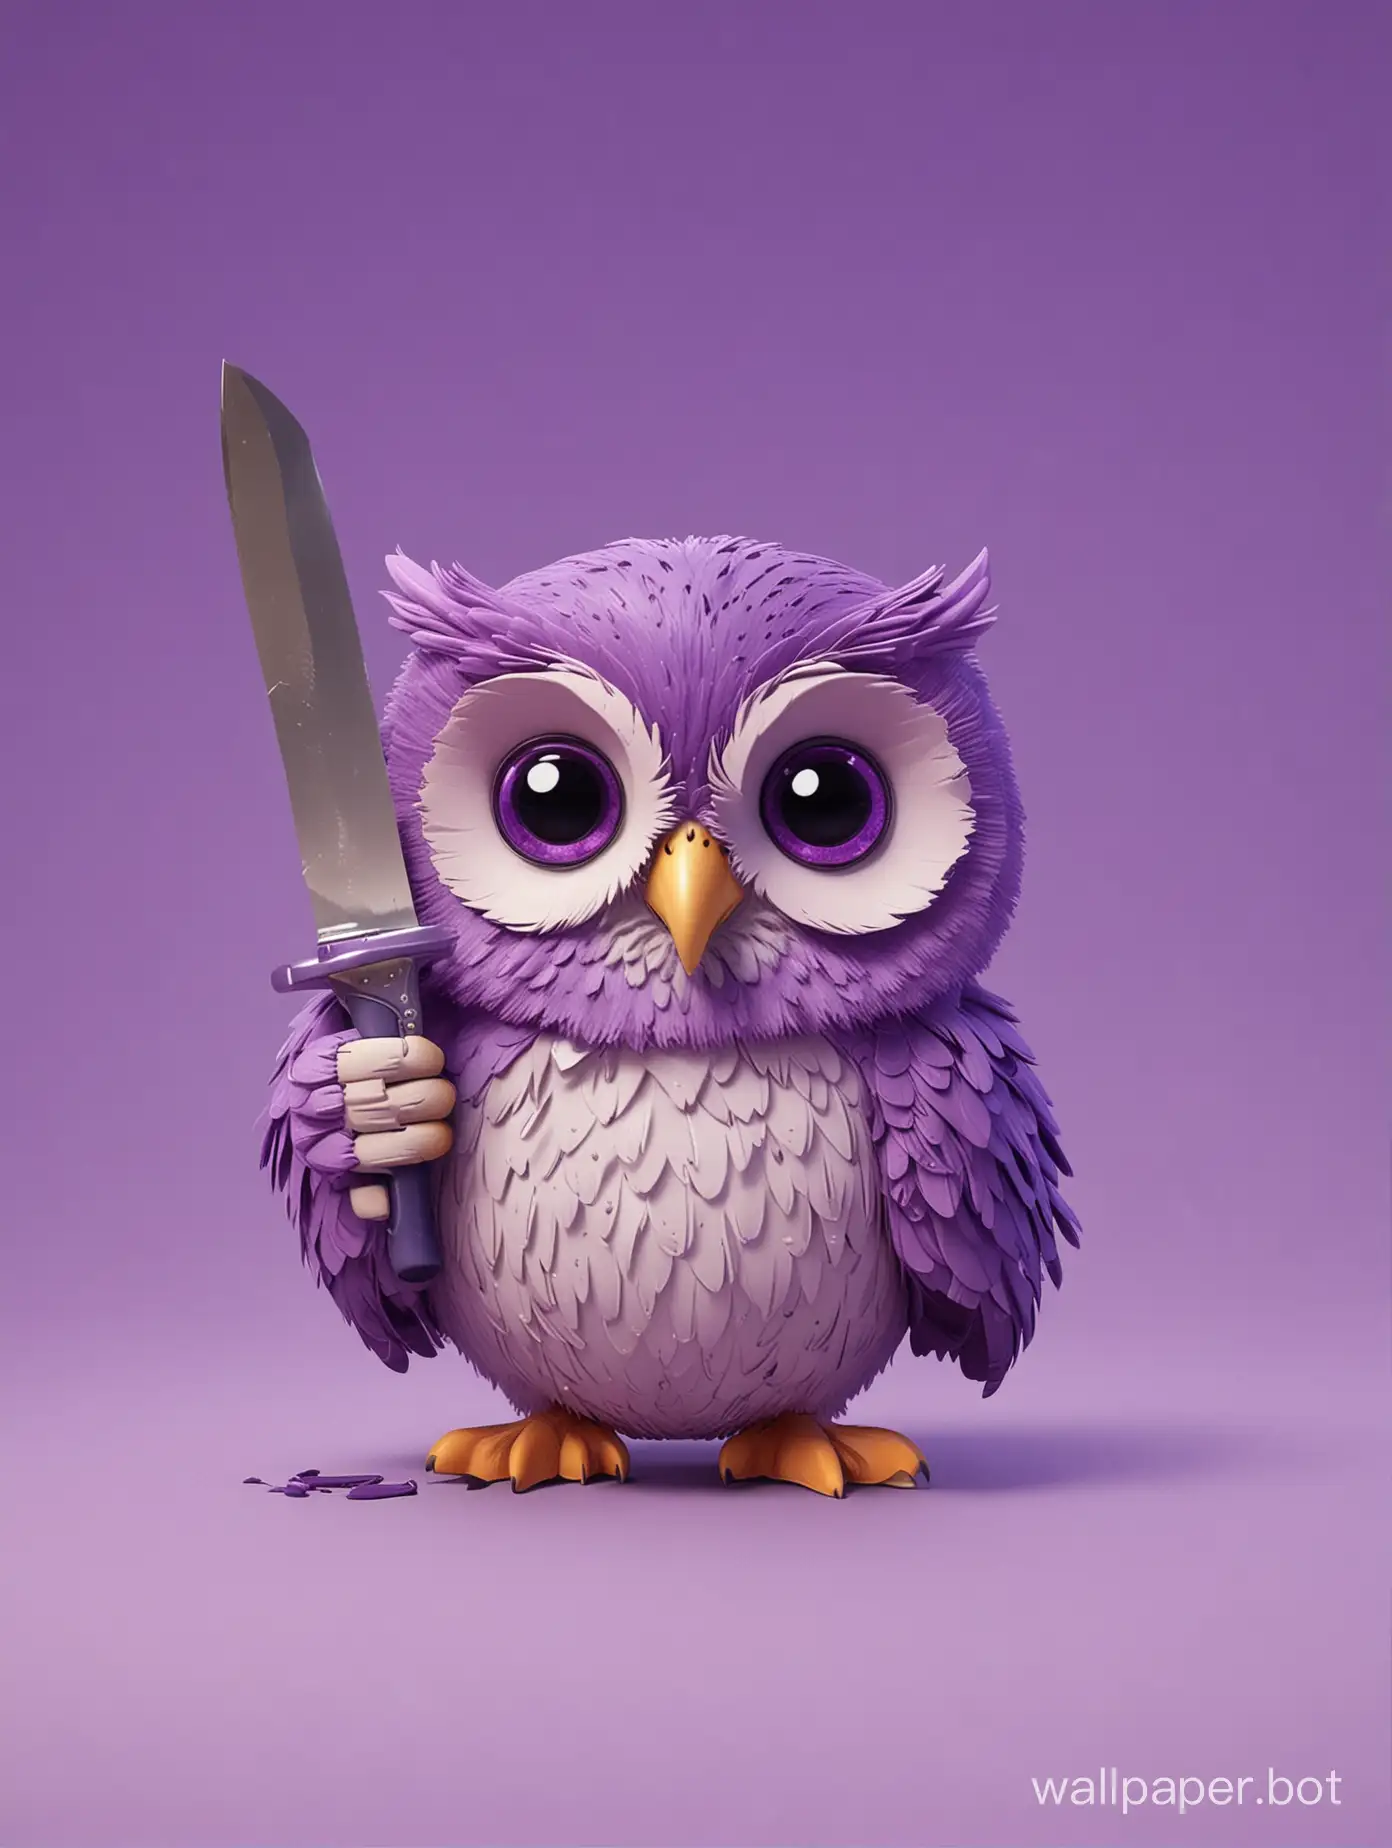 a cartoon small owl; holding knife; cuts video pipeline; background is purple gradient; small video fragments laying around owl's feets; owl less than 30 percent of wallpaper width